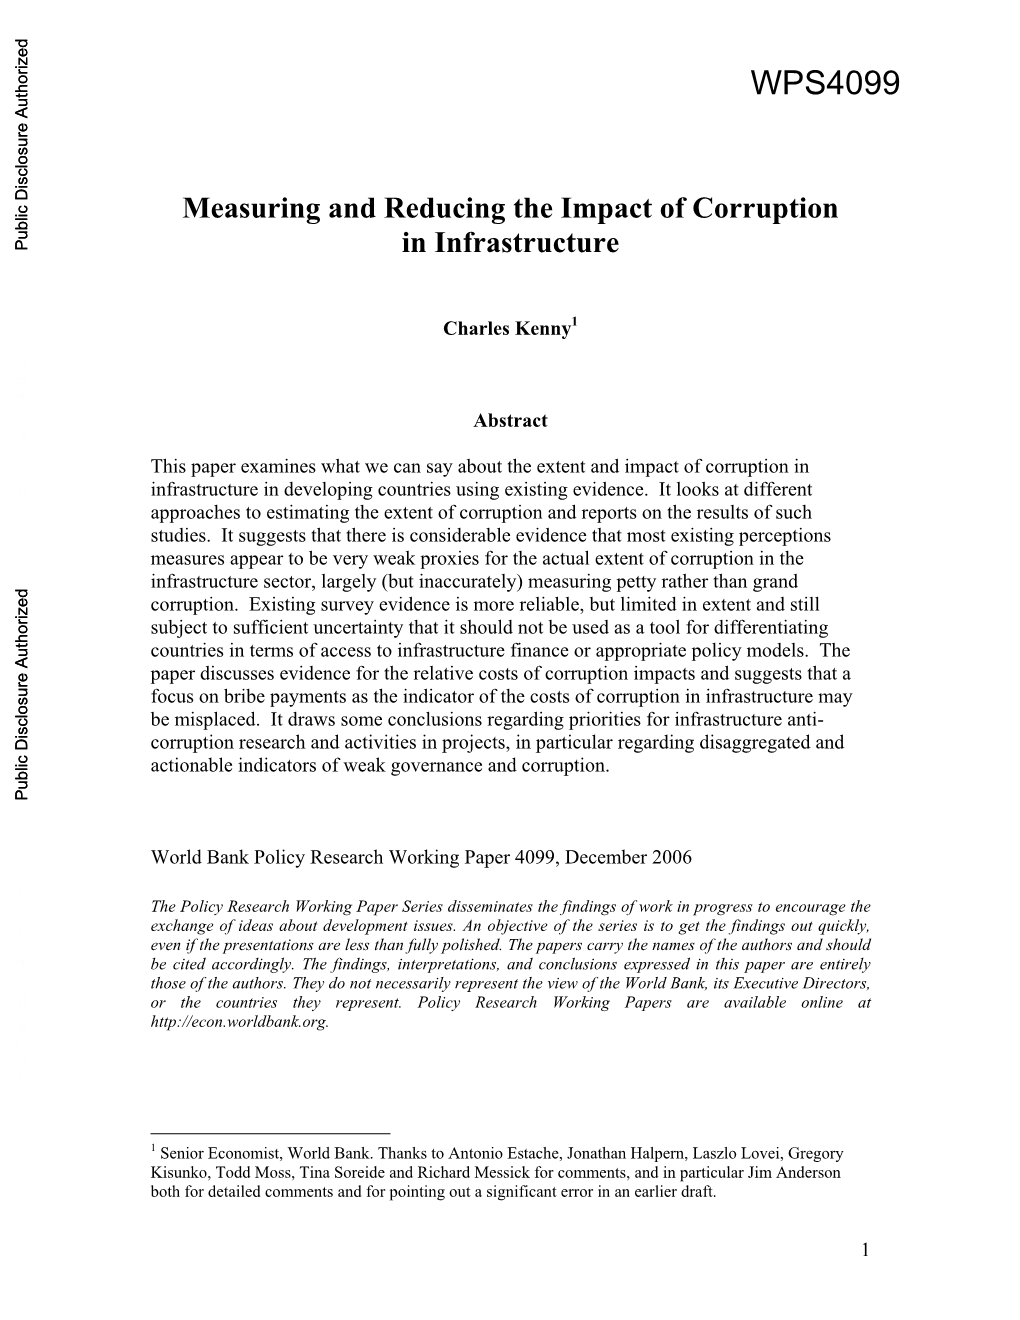 Measuring and Reducing the Impact of Corruption in Infrastructure